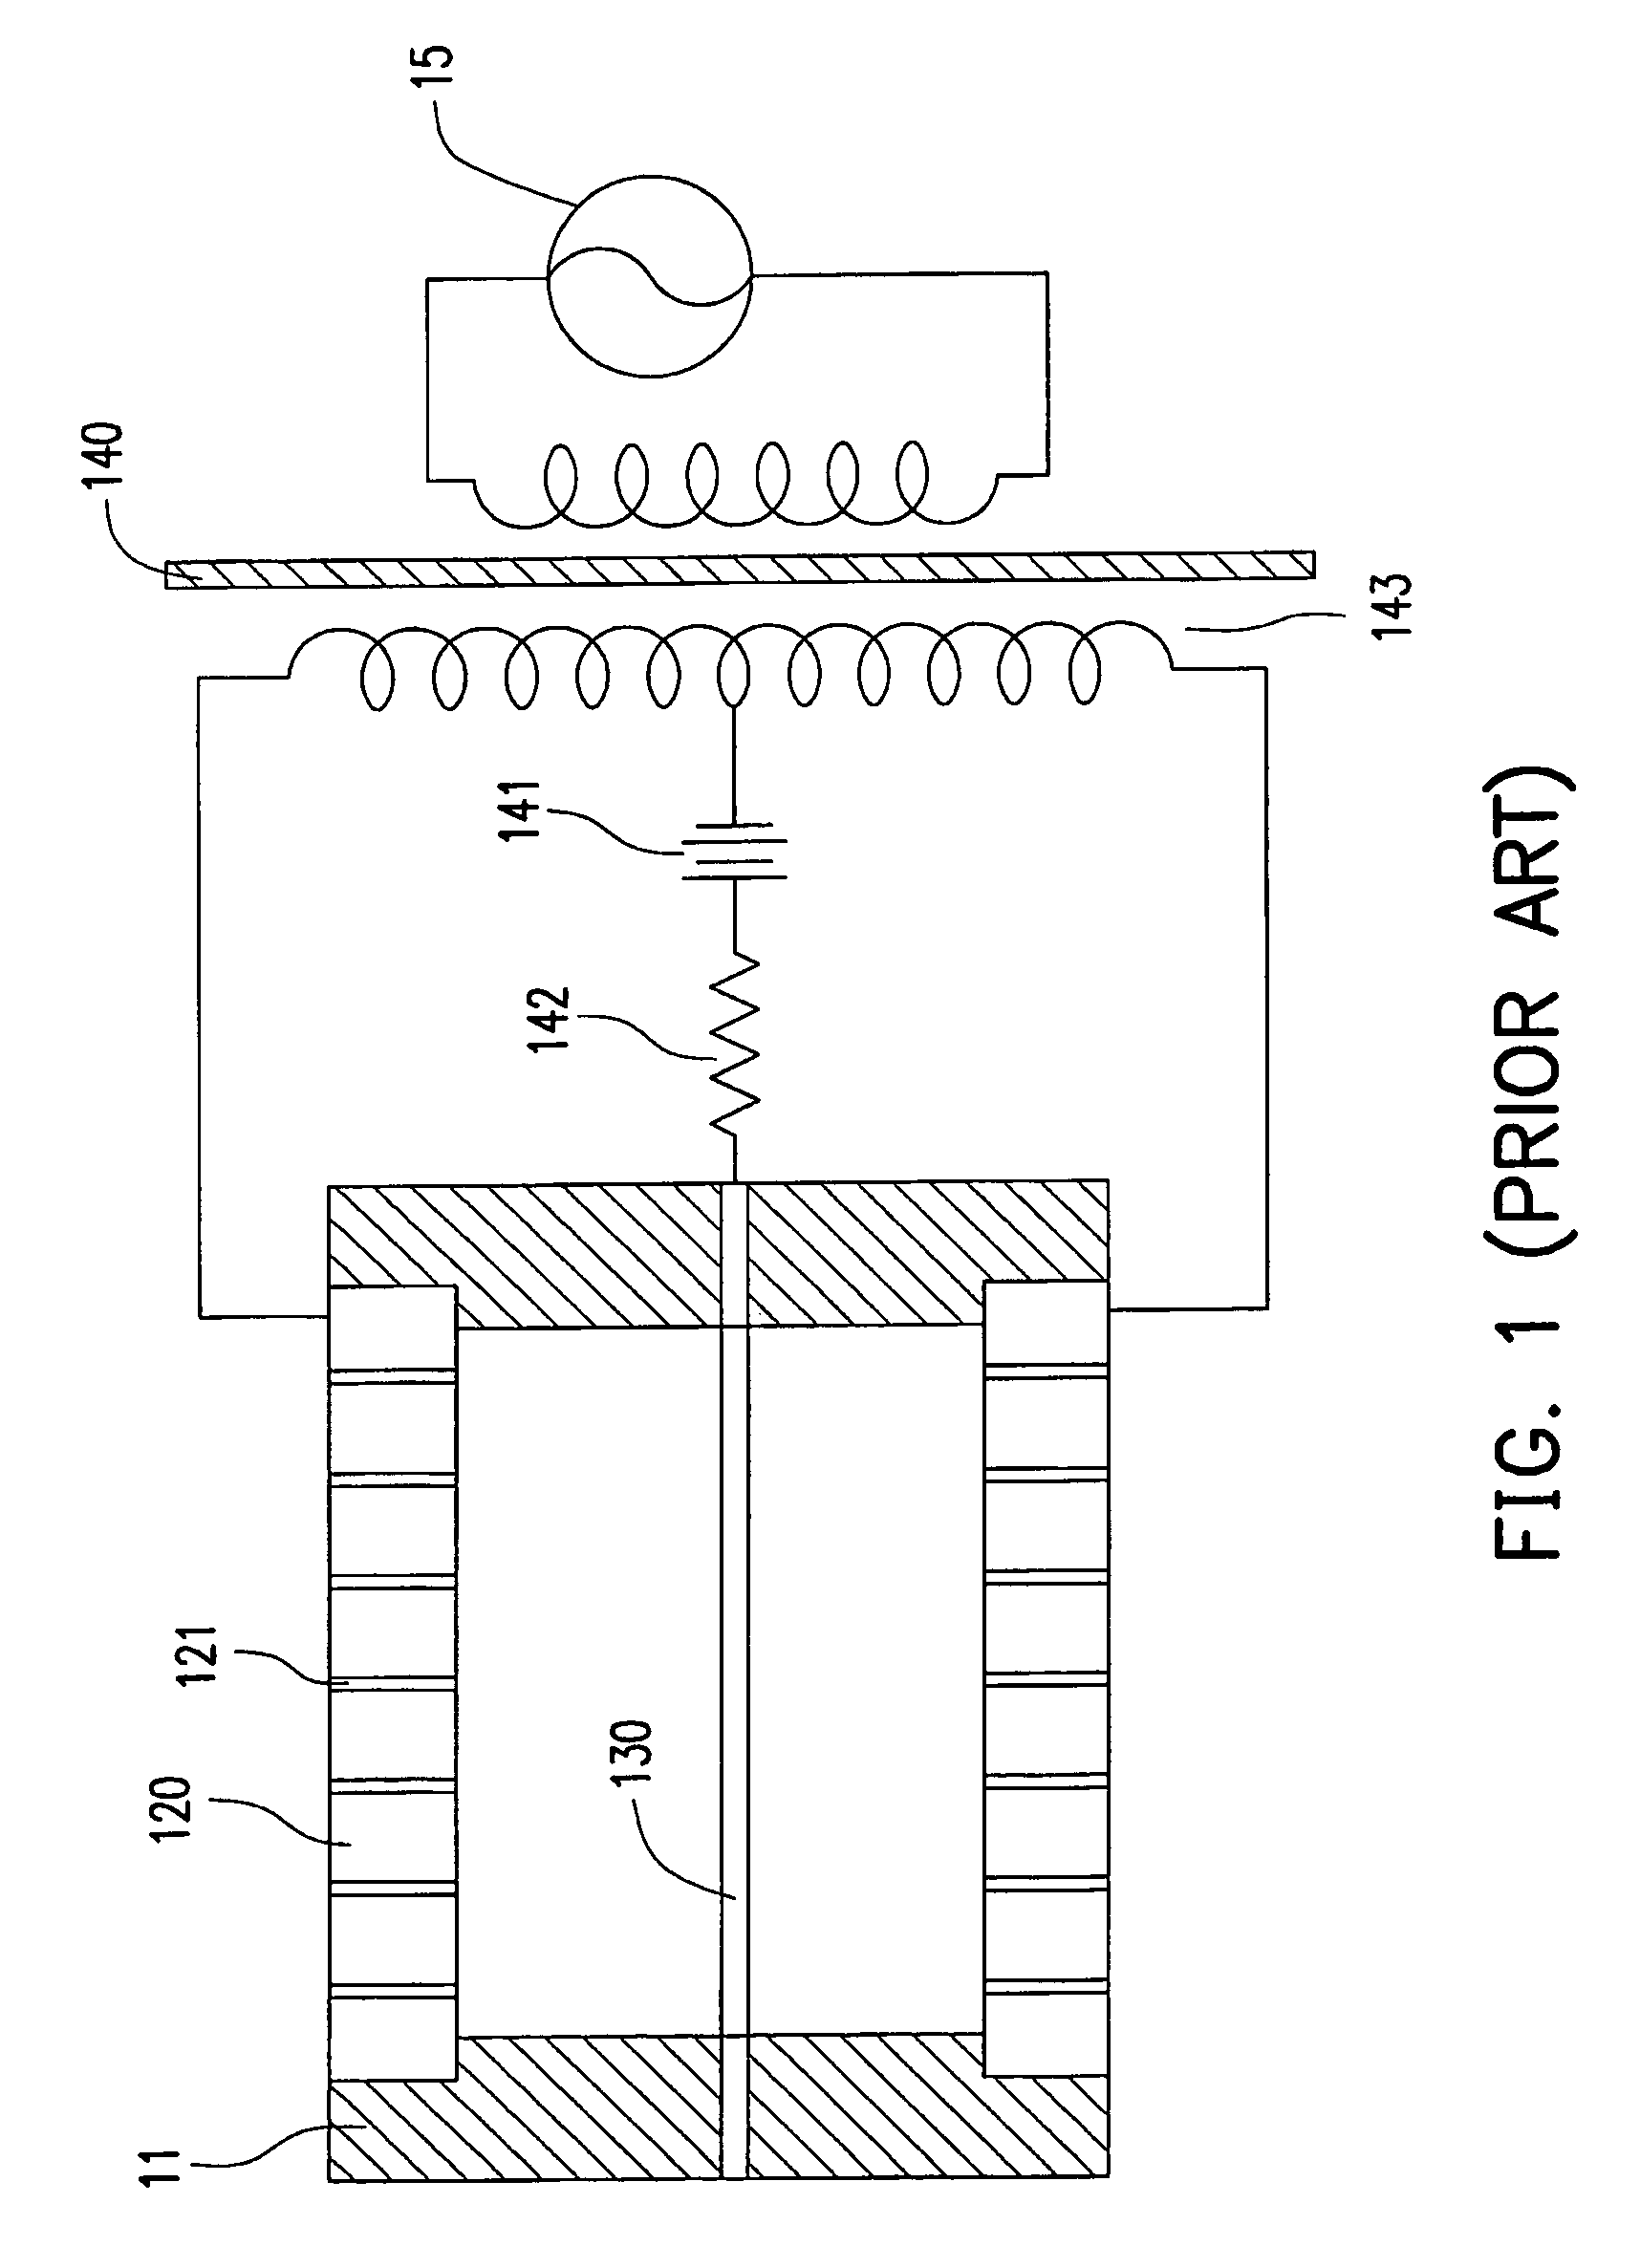 Structure and manufacturing method of electrostatic speaker